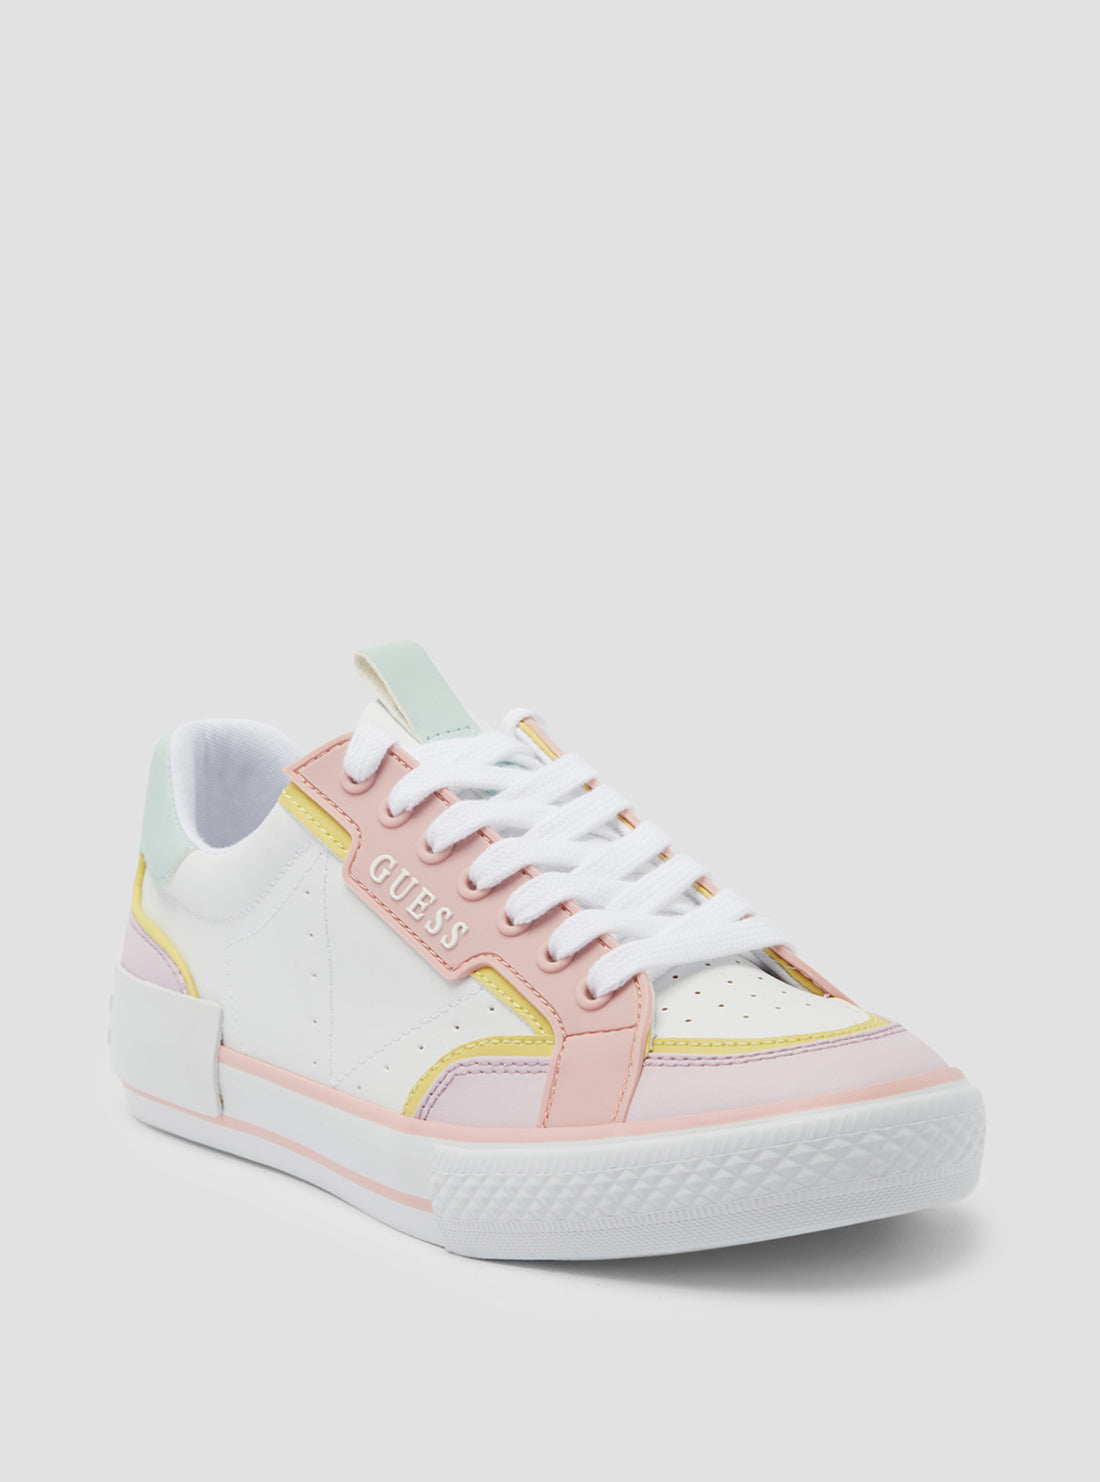 GUESS Women's White Pink Lollin Low Top Sneakers LOLLIN-A WHI04 Front View